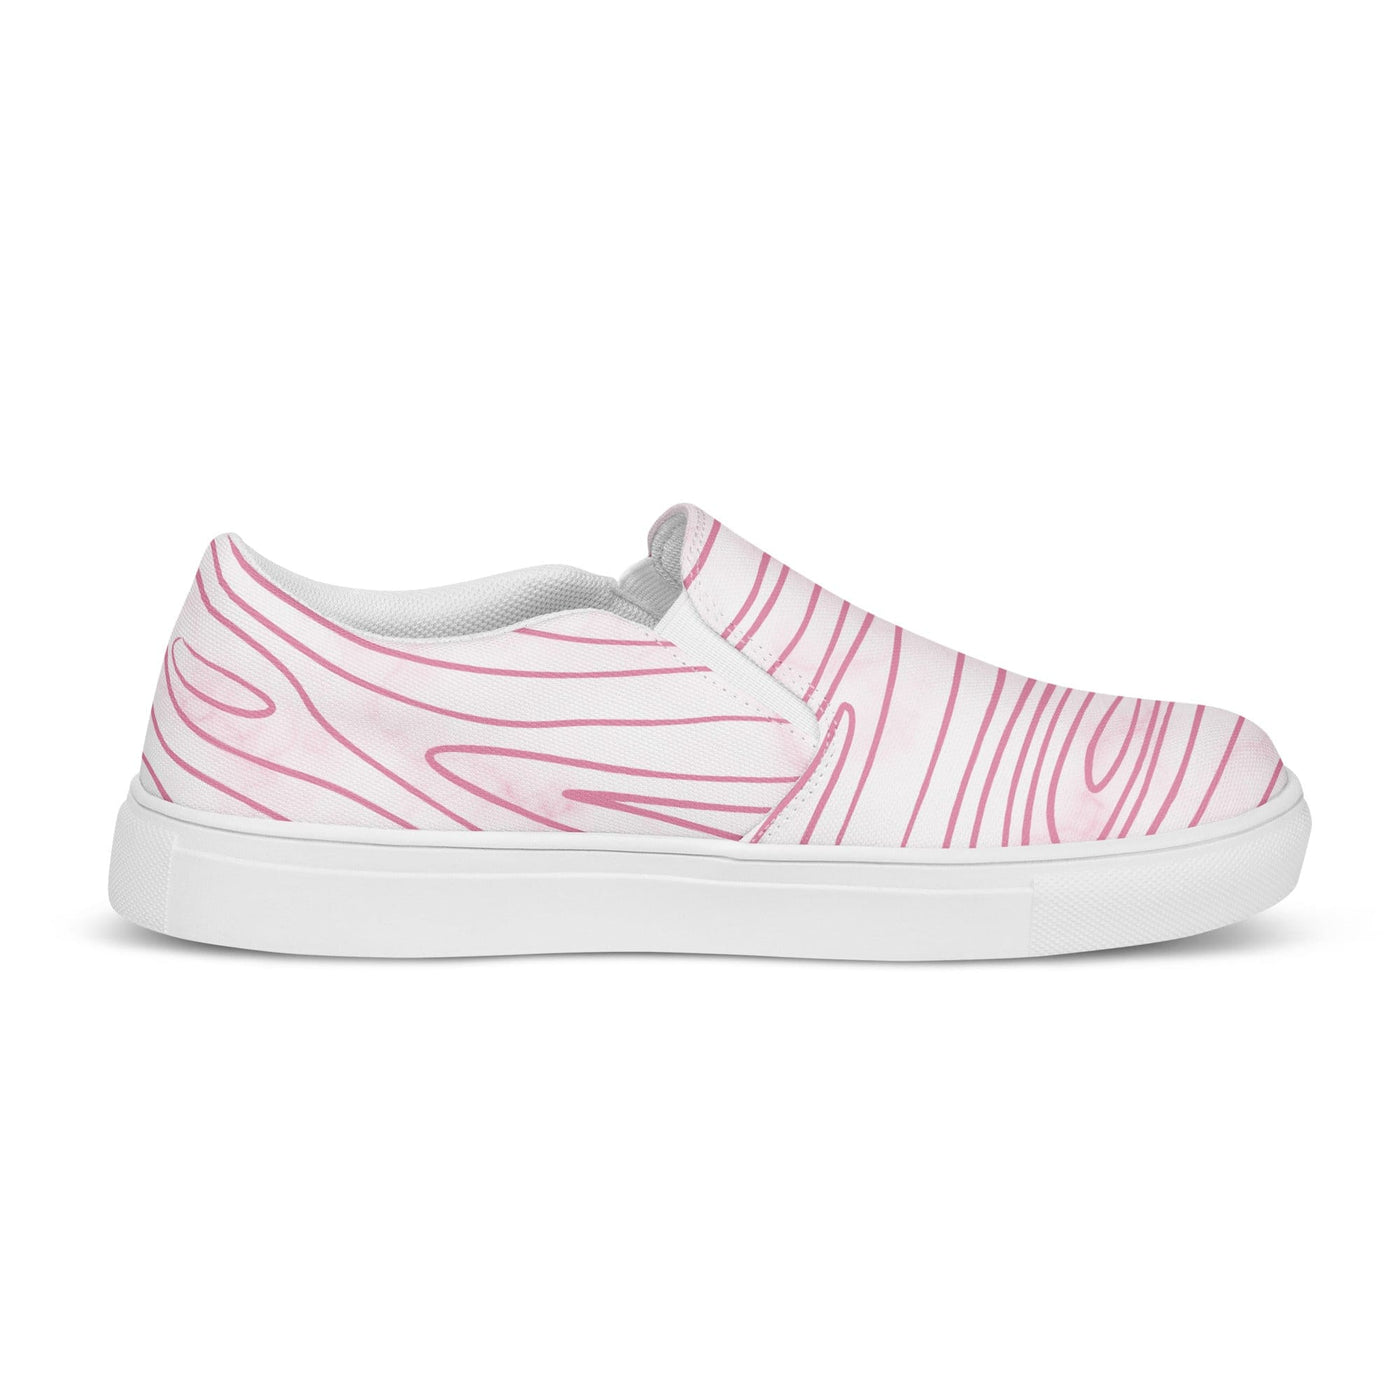 Women’s Slip-on Canvas Shoes Pink Line Art Sketch Print - Womens | Sneakers